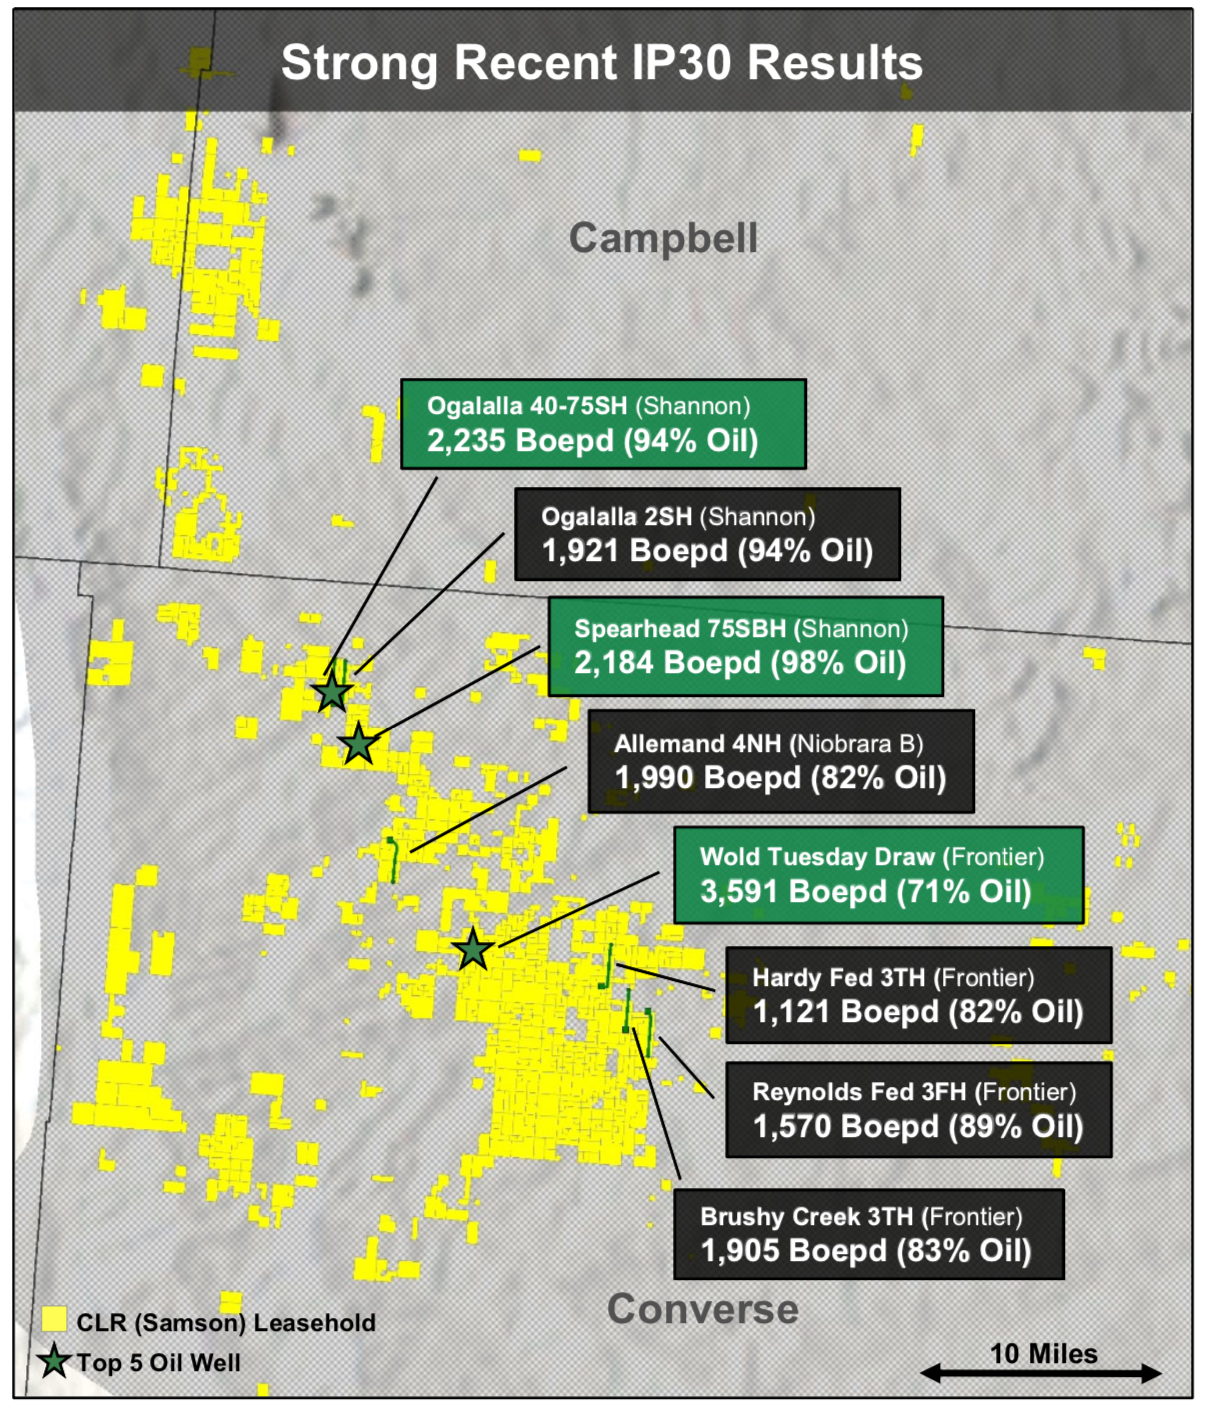 Powder River Basin asset map. (Source: Continental Resources Investor Presentation; Based on peak 30 days initial oil production (IP30), Includes: Samson Spearhead Fed 75SBH, Samson Ogalalla Fed 21-2215 40-75SH, Wold Tuesday Draw 3874-26-23-14-3FH, EOG Bolt 407-0904H (not shown on map), CHK RRC 5-34-70 USA B TR 23H (not shown on map).)